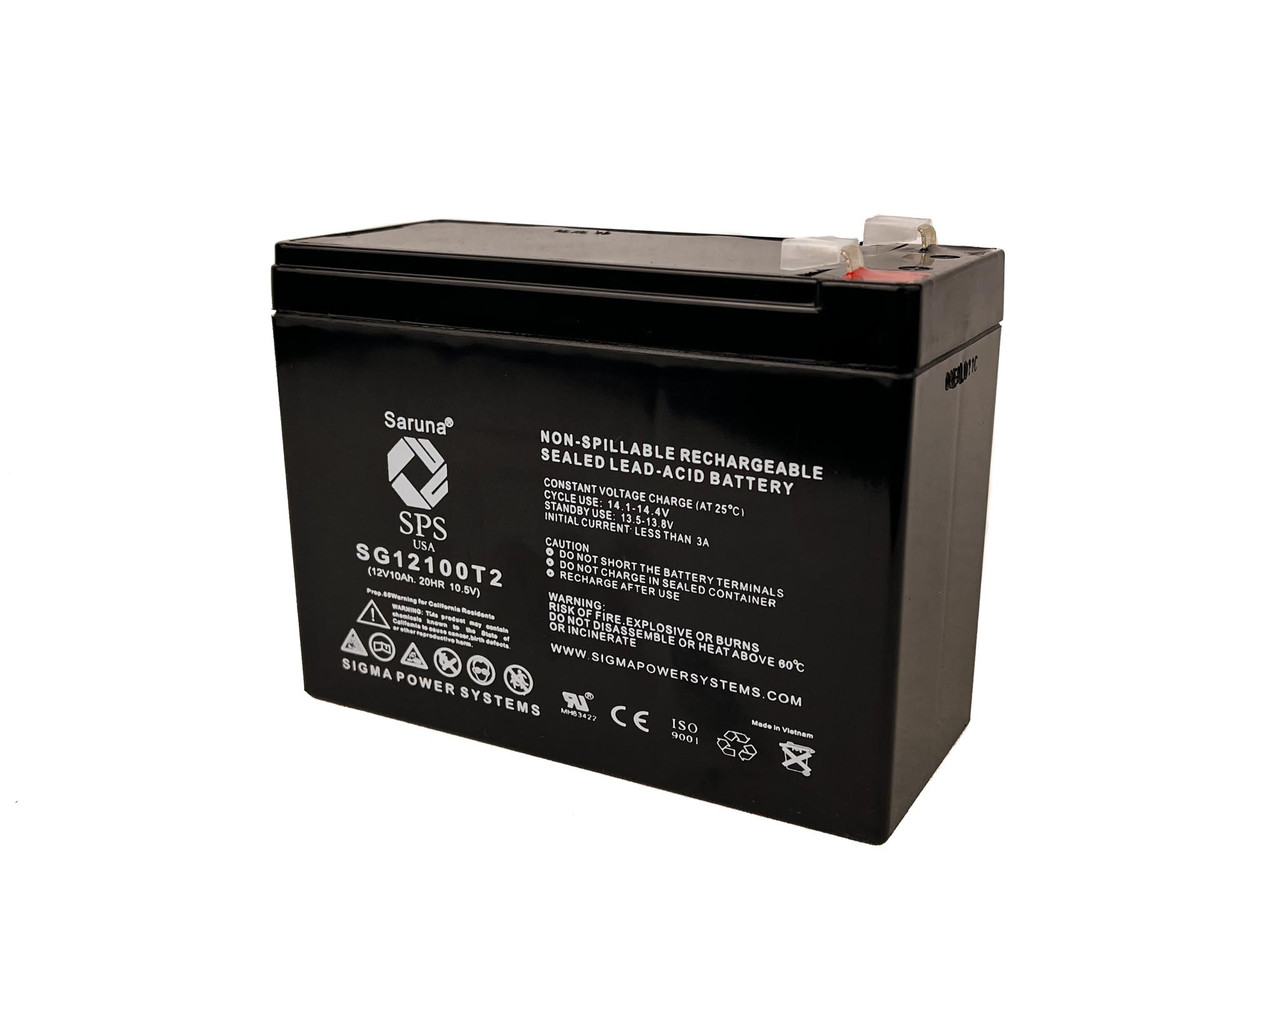 Raion Power 12V 10Ah Non-Spillable Replacement Rechargebale Battery for Tianchang TC12-10-A